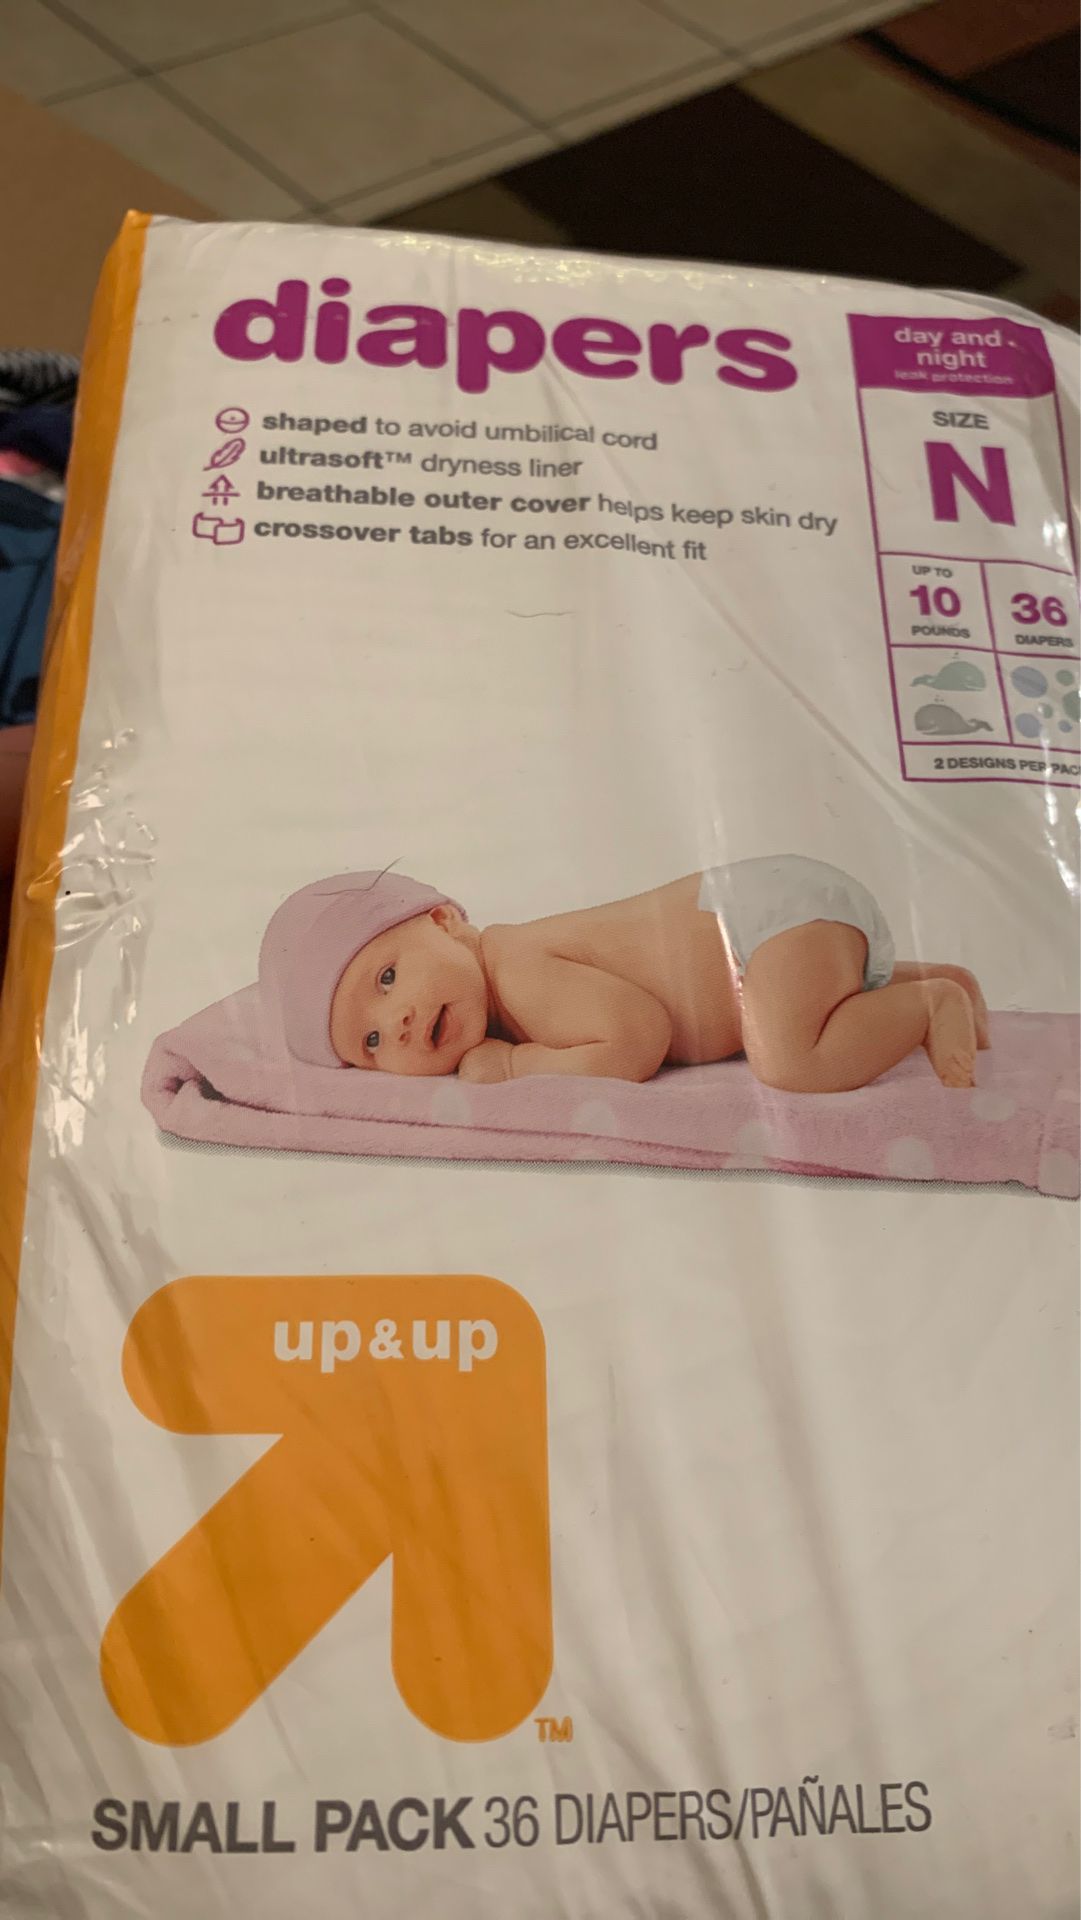 Up and up newborn diapers